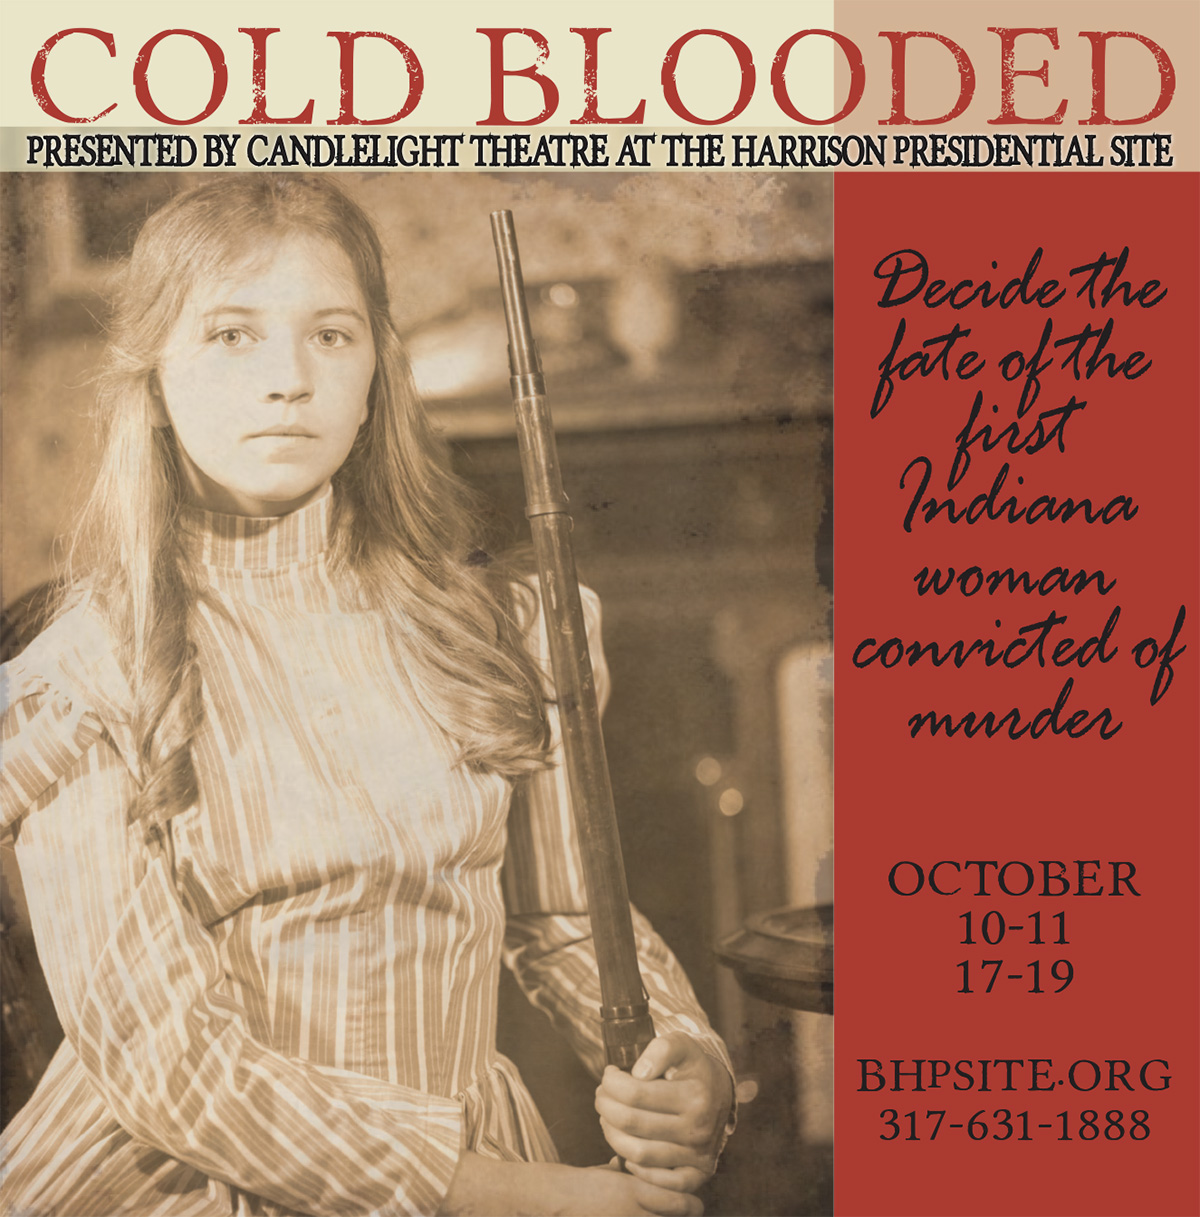 sepia-toned Photograph of a young girl in a victorian dress holding a shotgun. Text reads: Cold Blooded by James Trofatter. presented by candlelight theatre at the harrison presidential site. decide the fate of the first indiana woman convicted of murder. october 10 to 11. 17 to 19. bhp site dot org. 317-631-1888